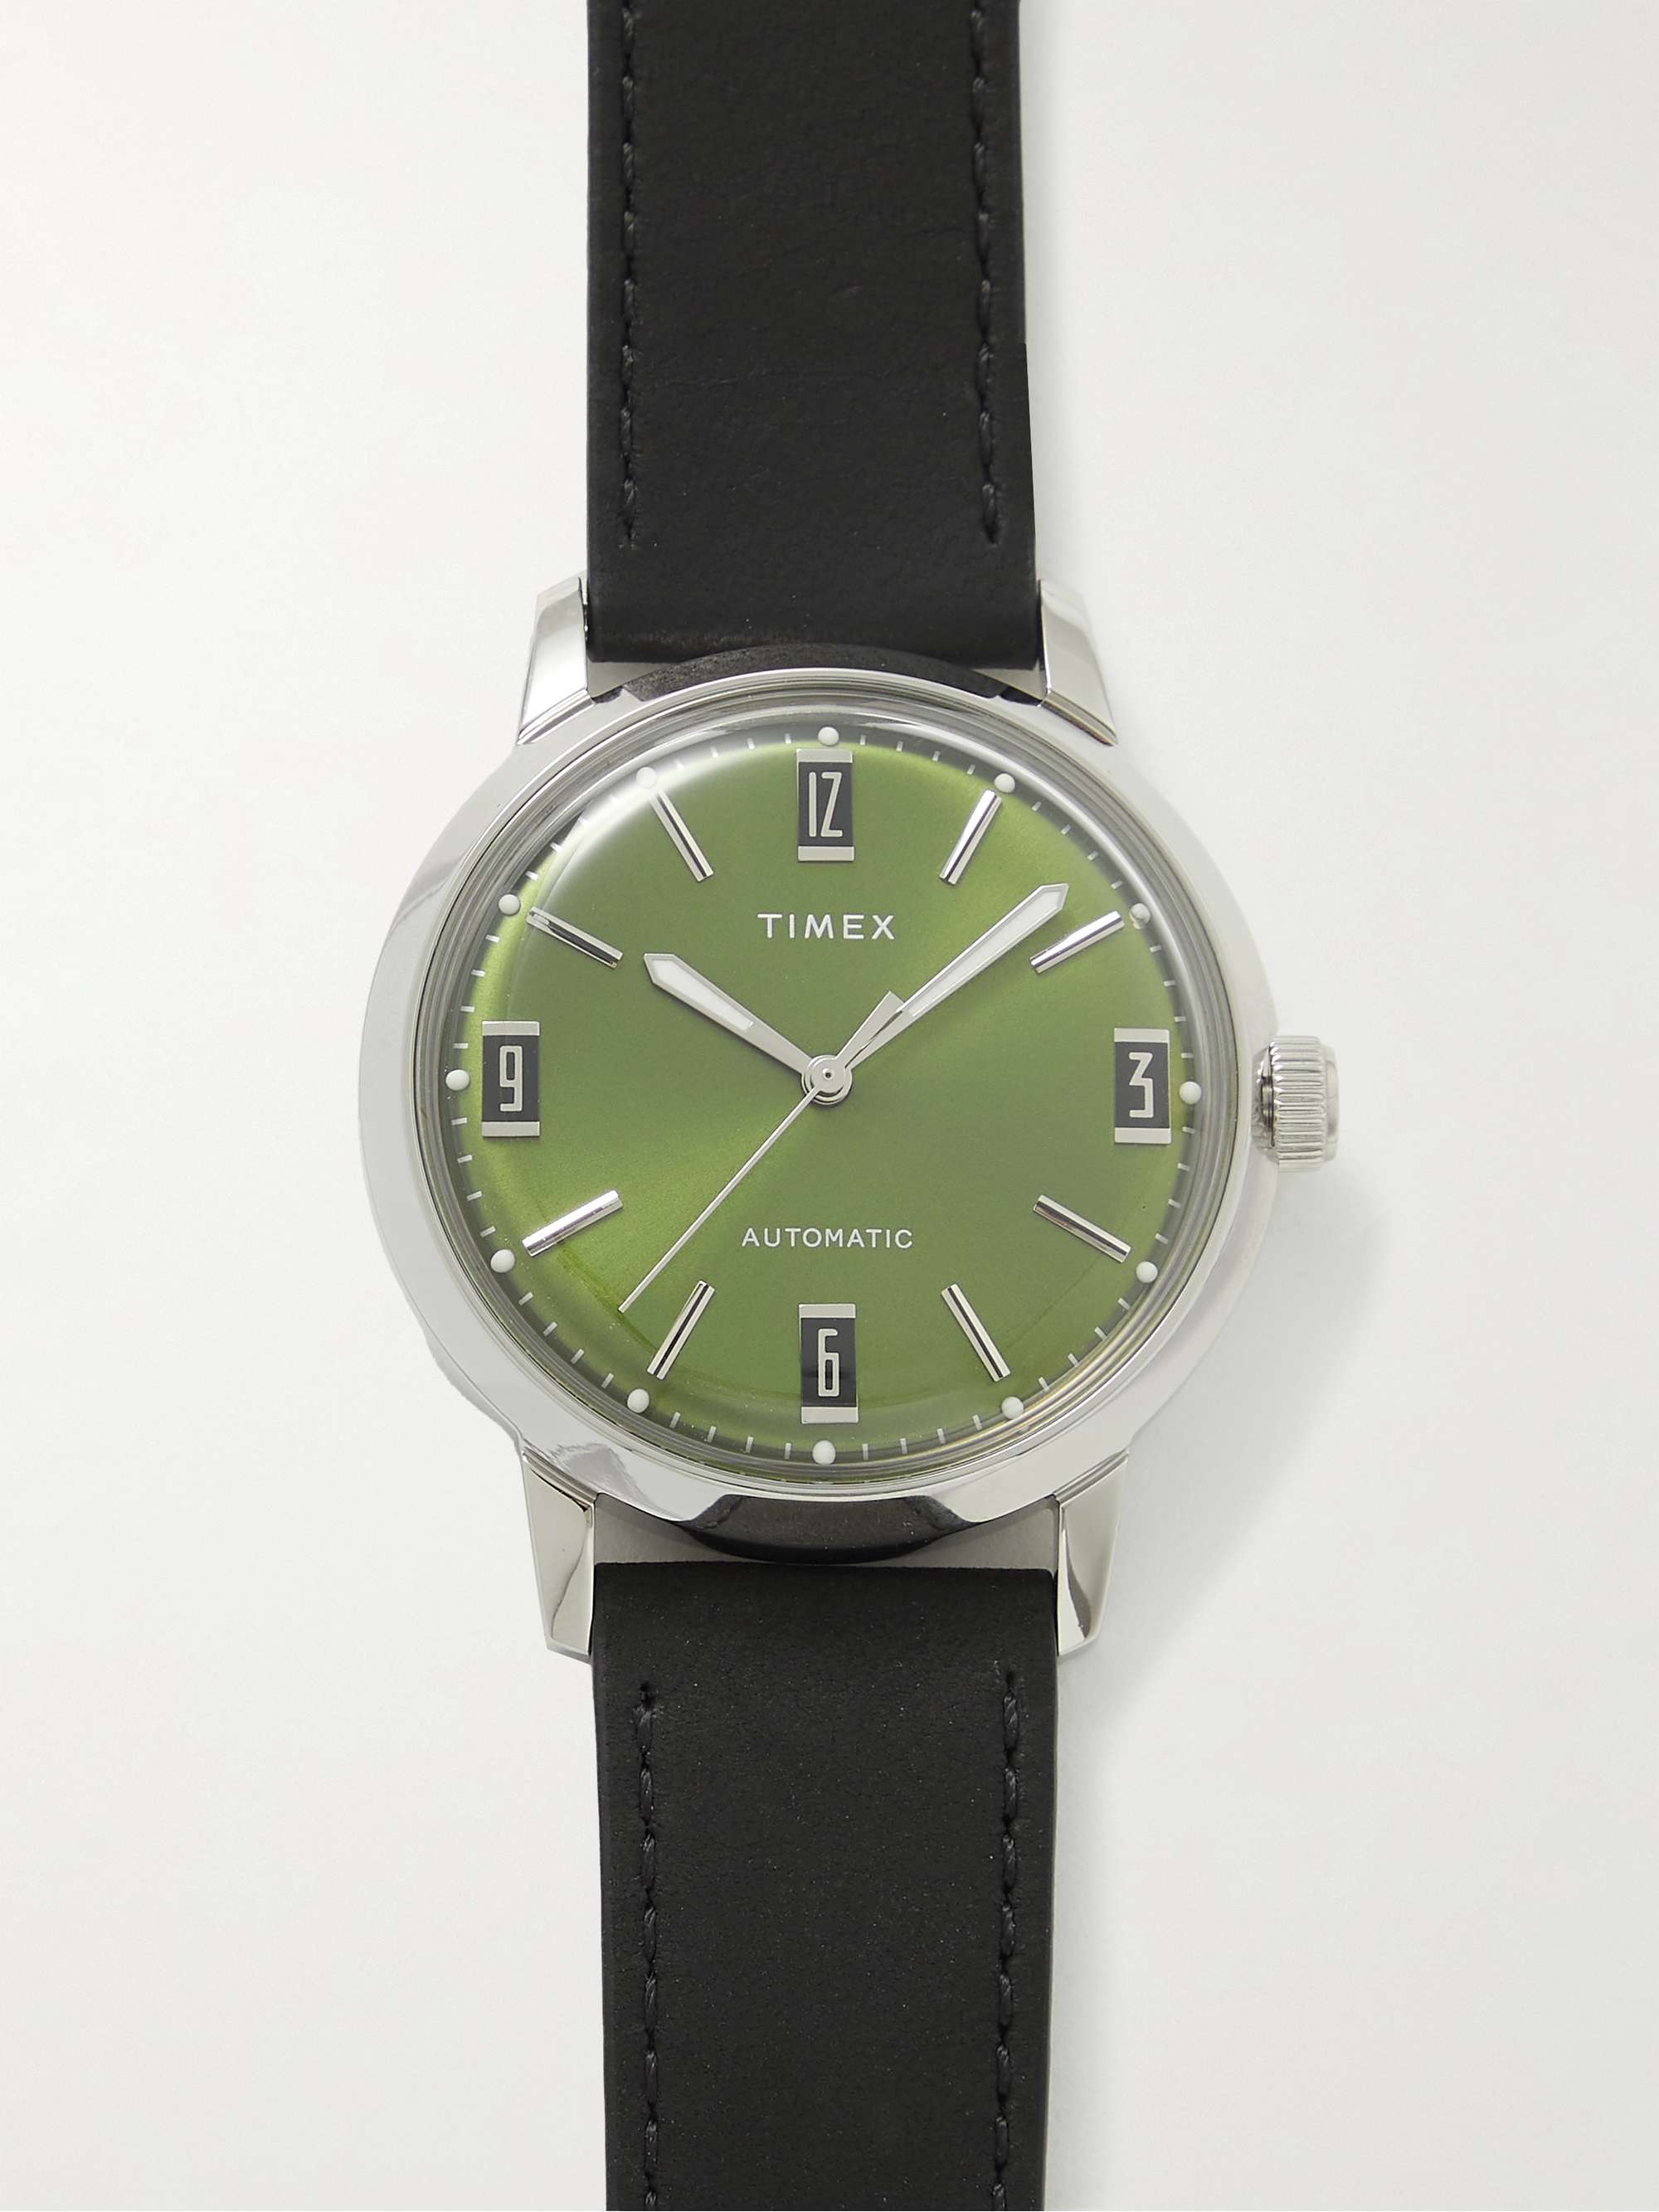 TIMEX Marlin Automatic 40mm Stainless Steel and Leather Watch